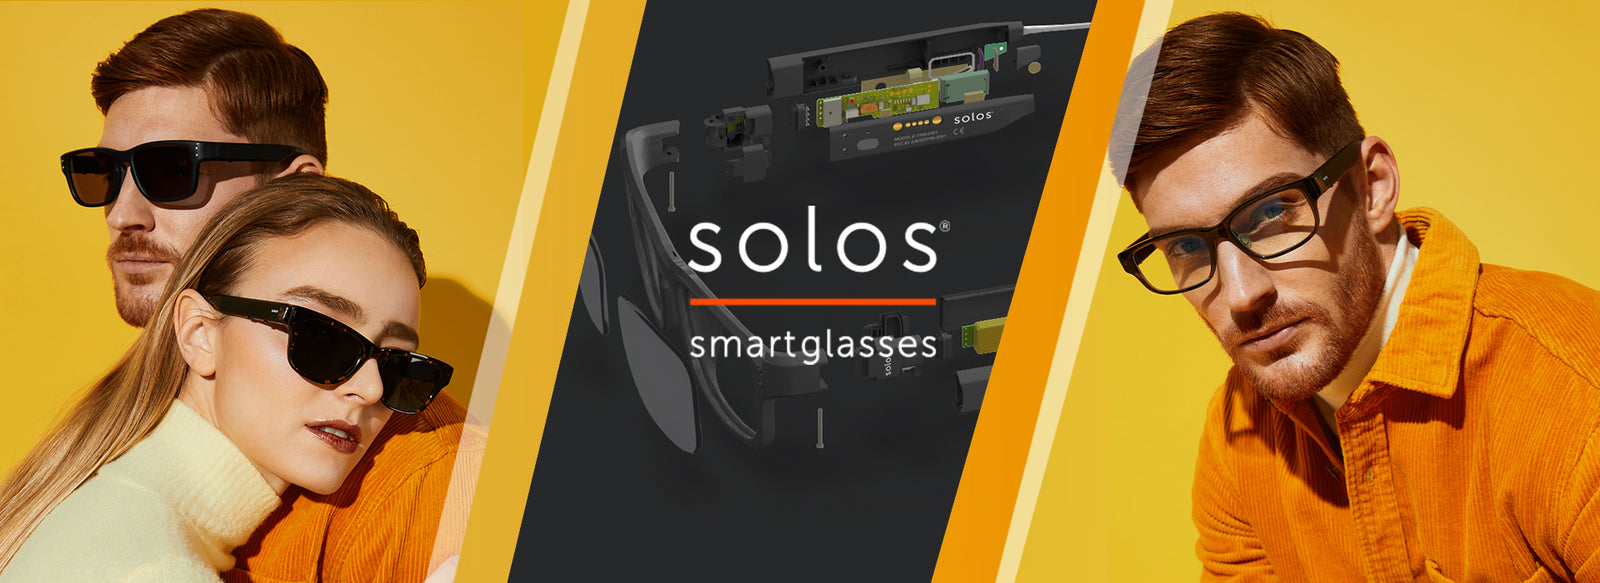 Smart Glasses | Smart Glasses Are Stronger This Year, Don't Miss Your Chance To Get Them - Solos Technology Limited